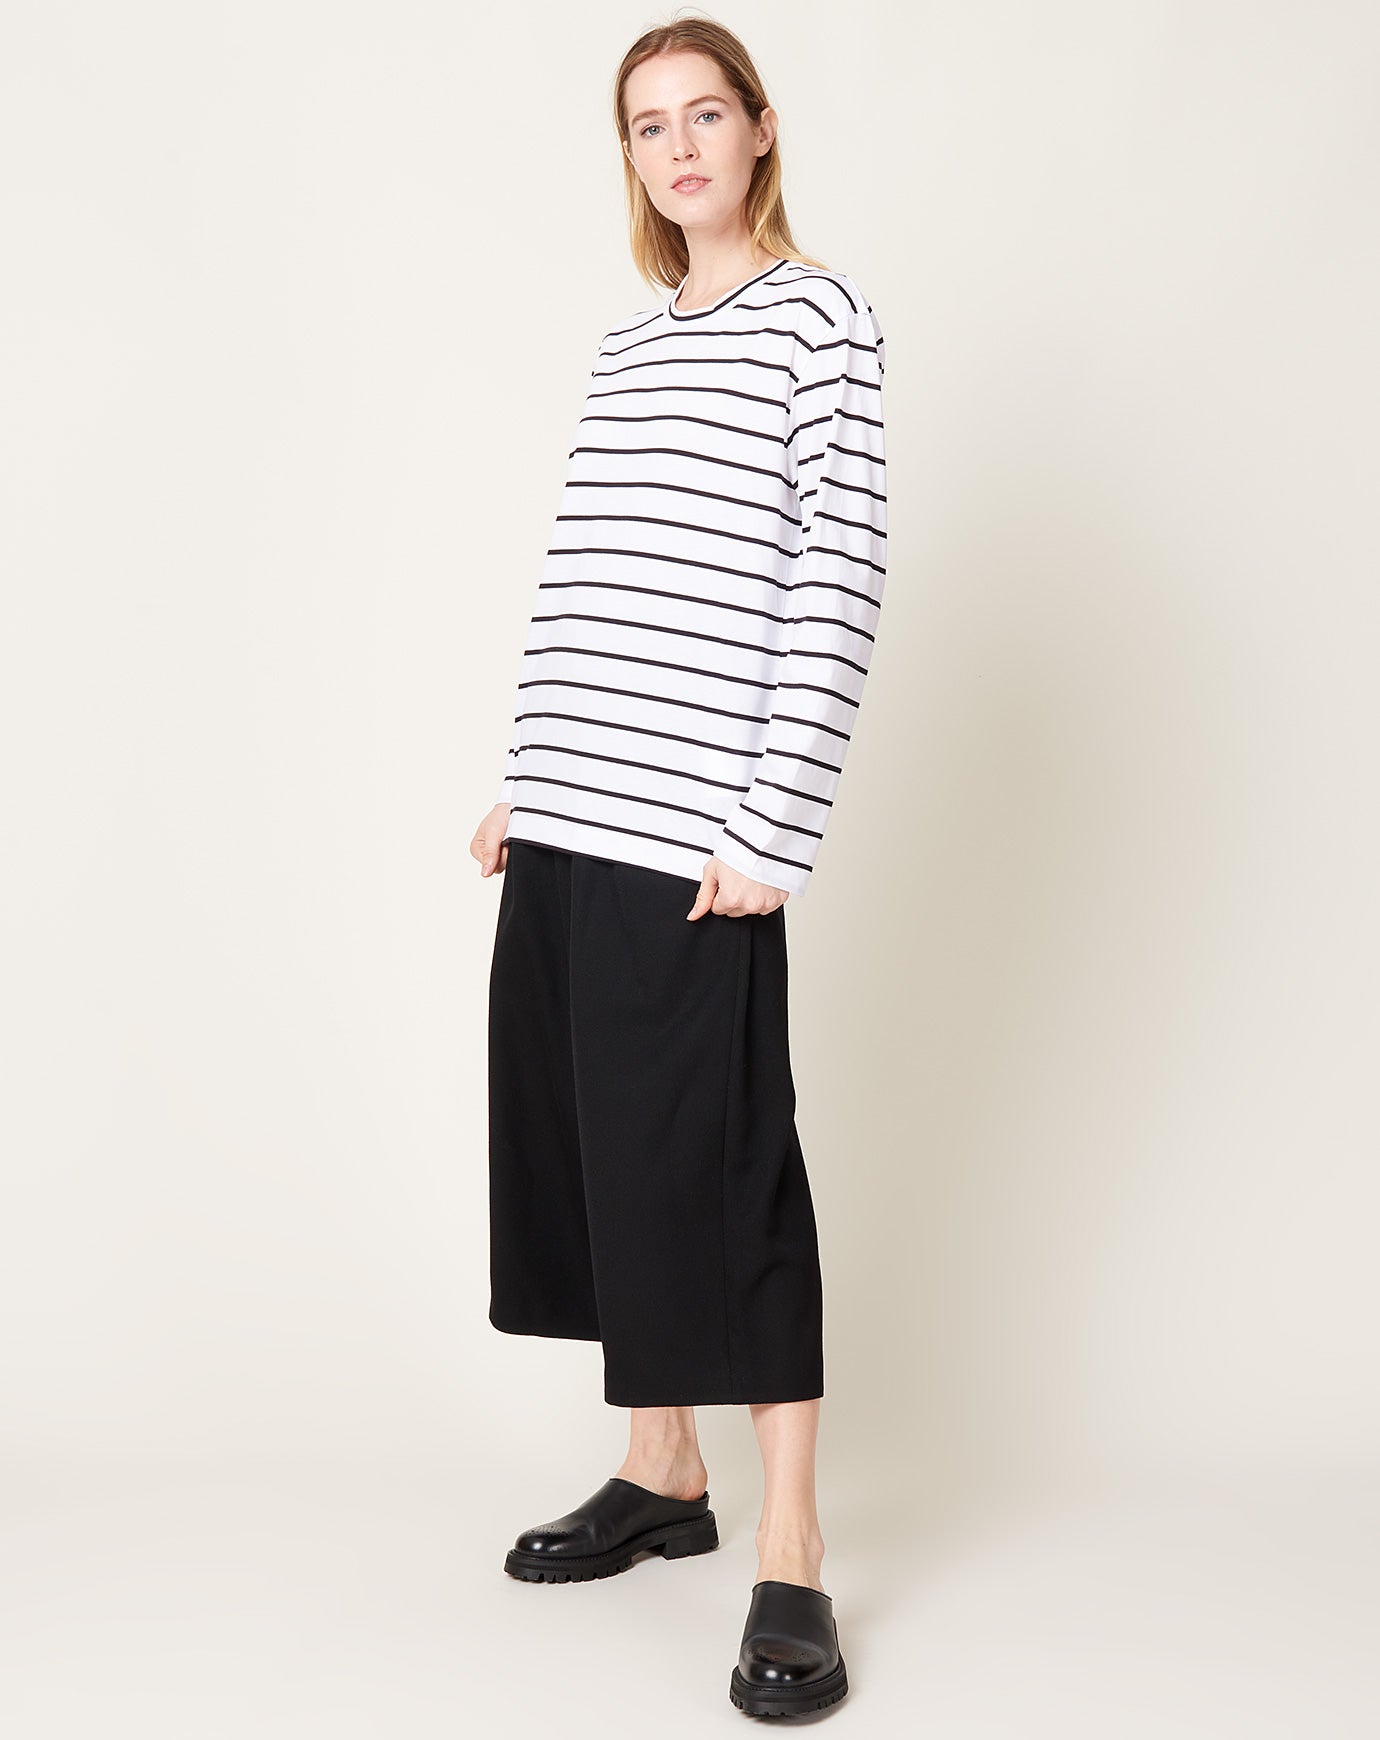 Comme des Garçons Comme des Garçons Cotton Jersey Stripe T Shirt in White and Black